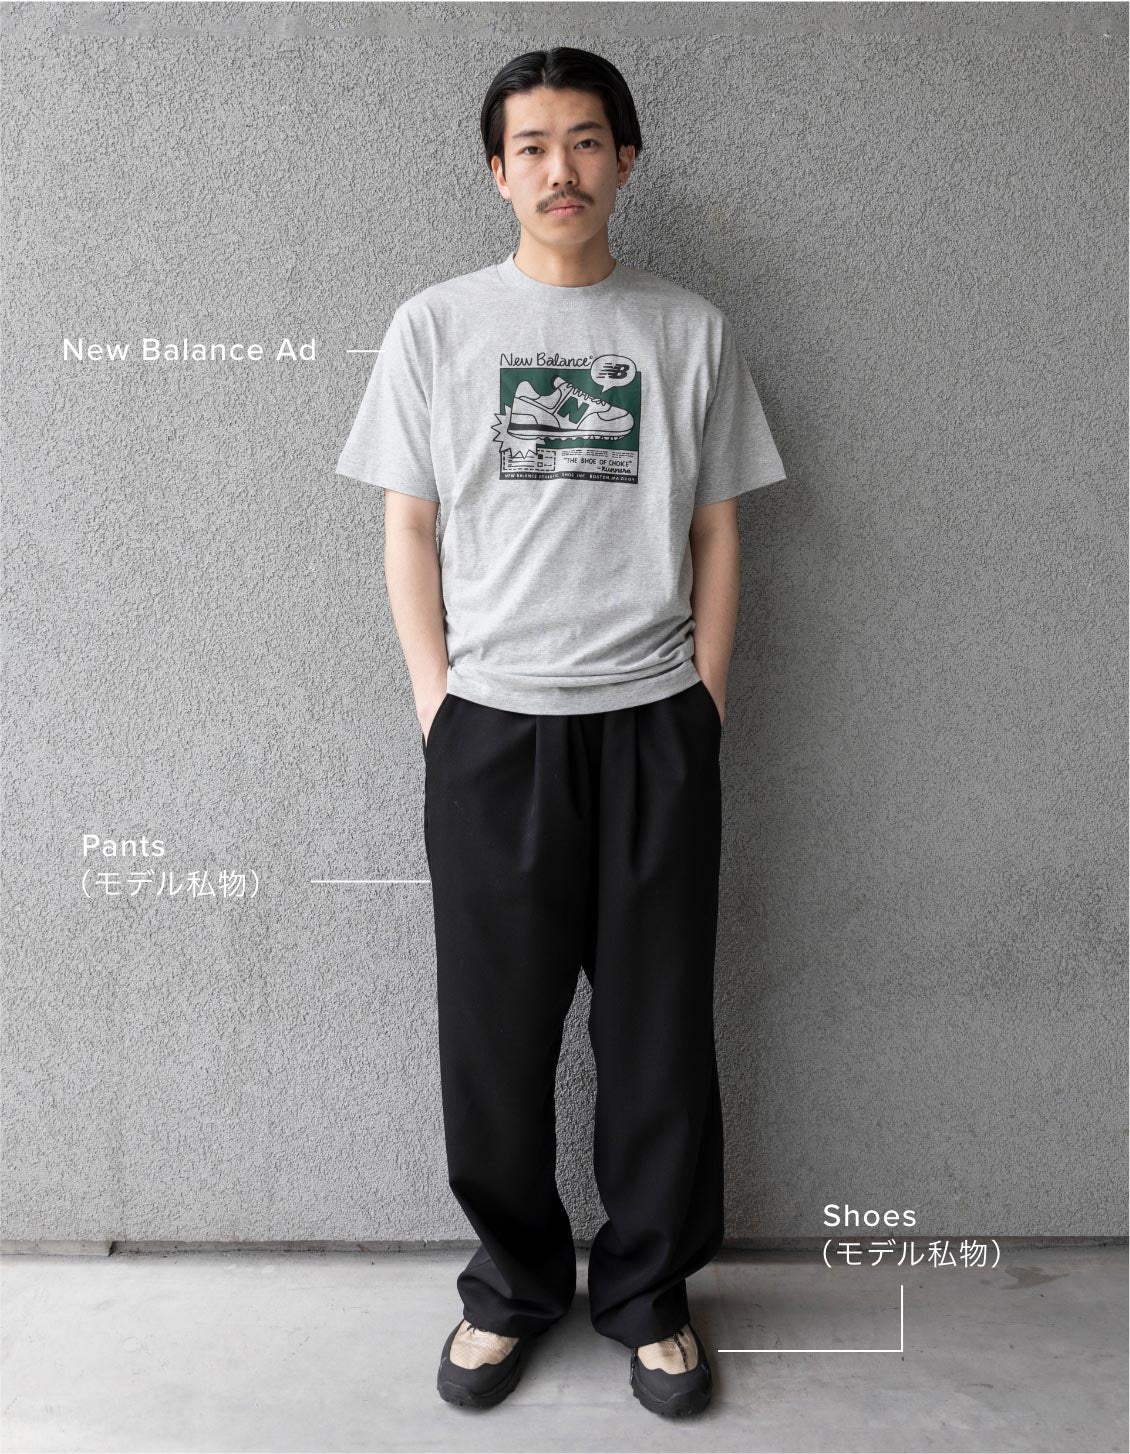 Ryo Ishikawa outfit details: T-shirt: New Balance Ad, Pants: Model's own, Shoes: Model's own